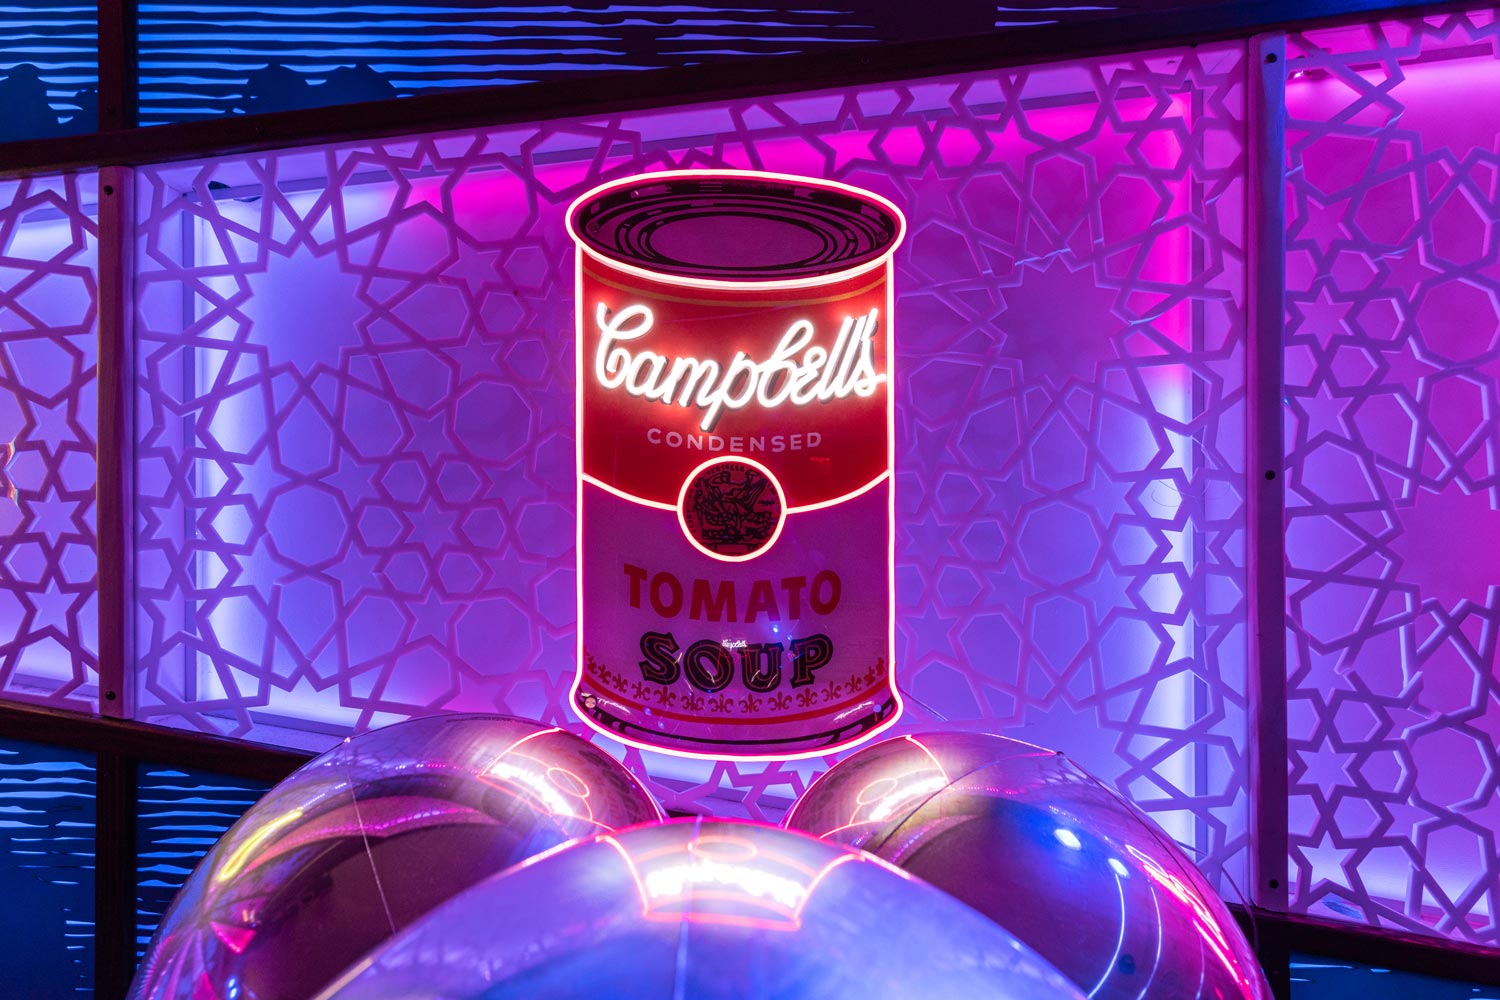 Yellowpop x The Andy Warhol Foundation Limited-Edition Neon Art